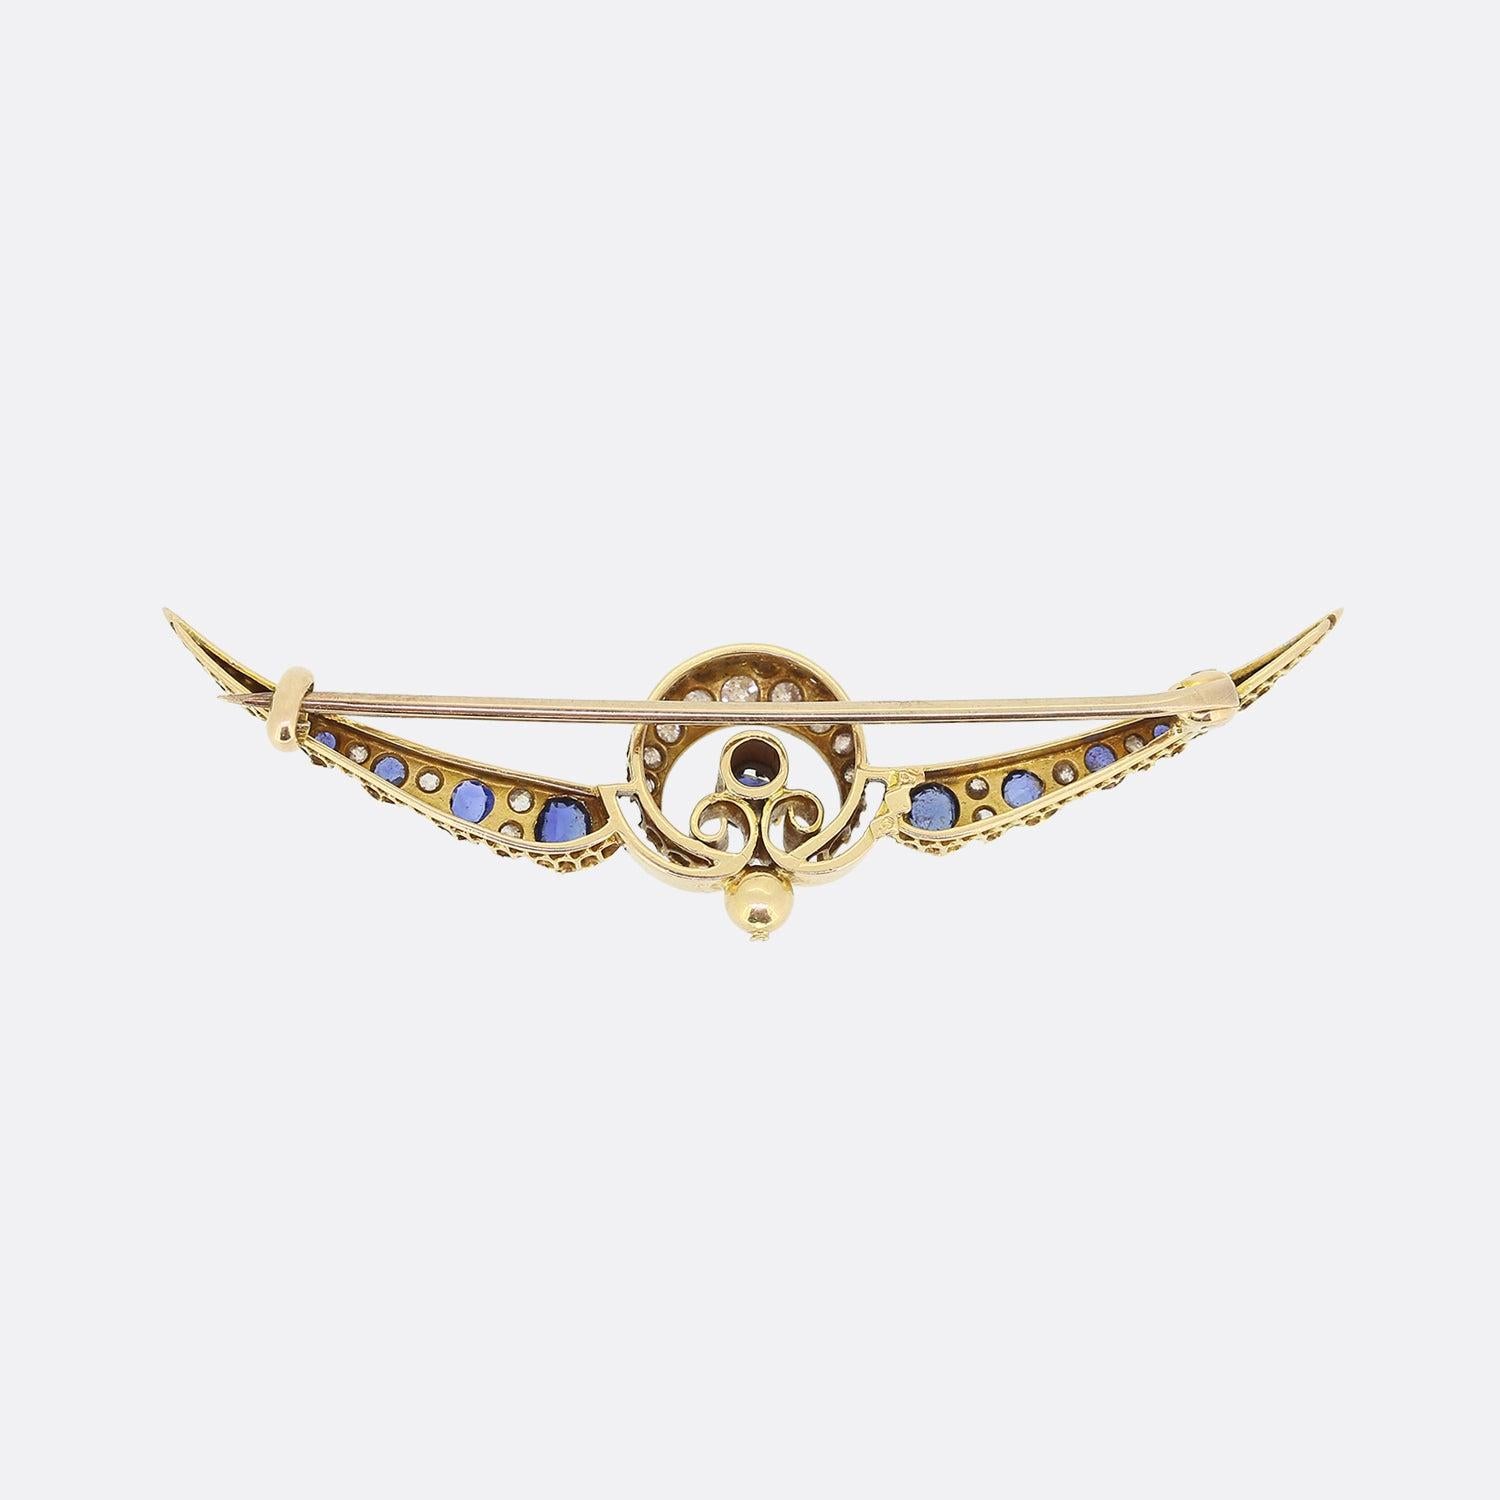 This is a gorgeous sapphire and diamond set crescent moon brooch dating back to the Victorian period. It is crafted in 18ct yellow gold featuring a single row of claw set old cut diamonds and natural blue sapphires which graduate in size towards the